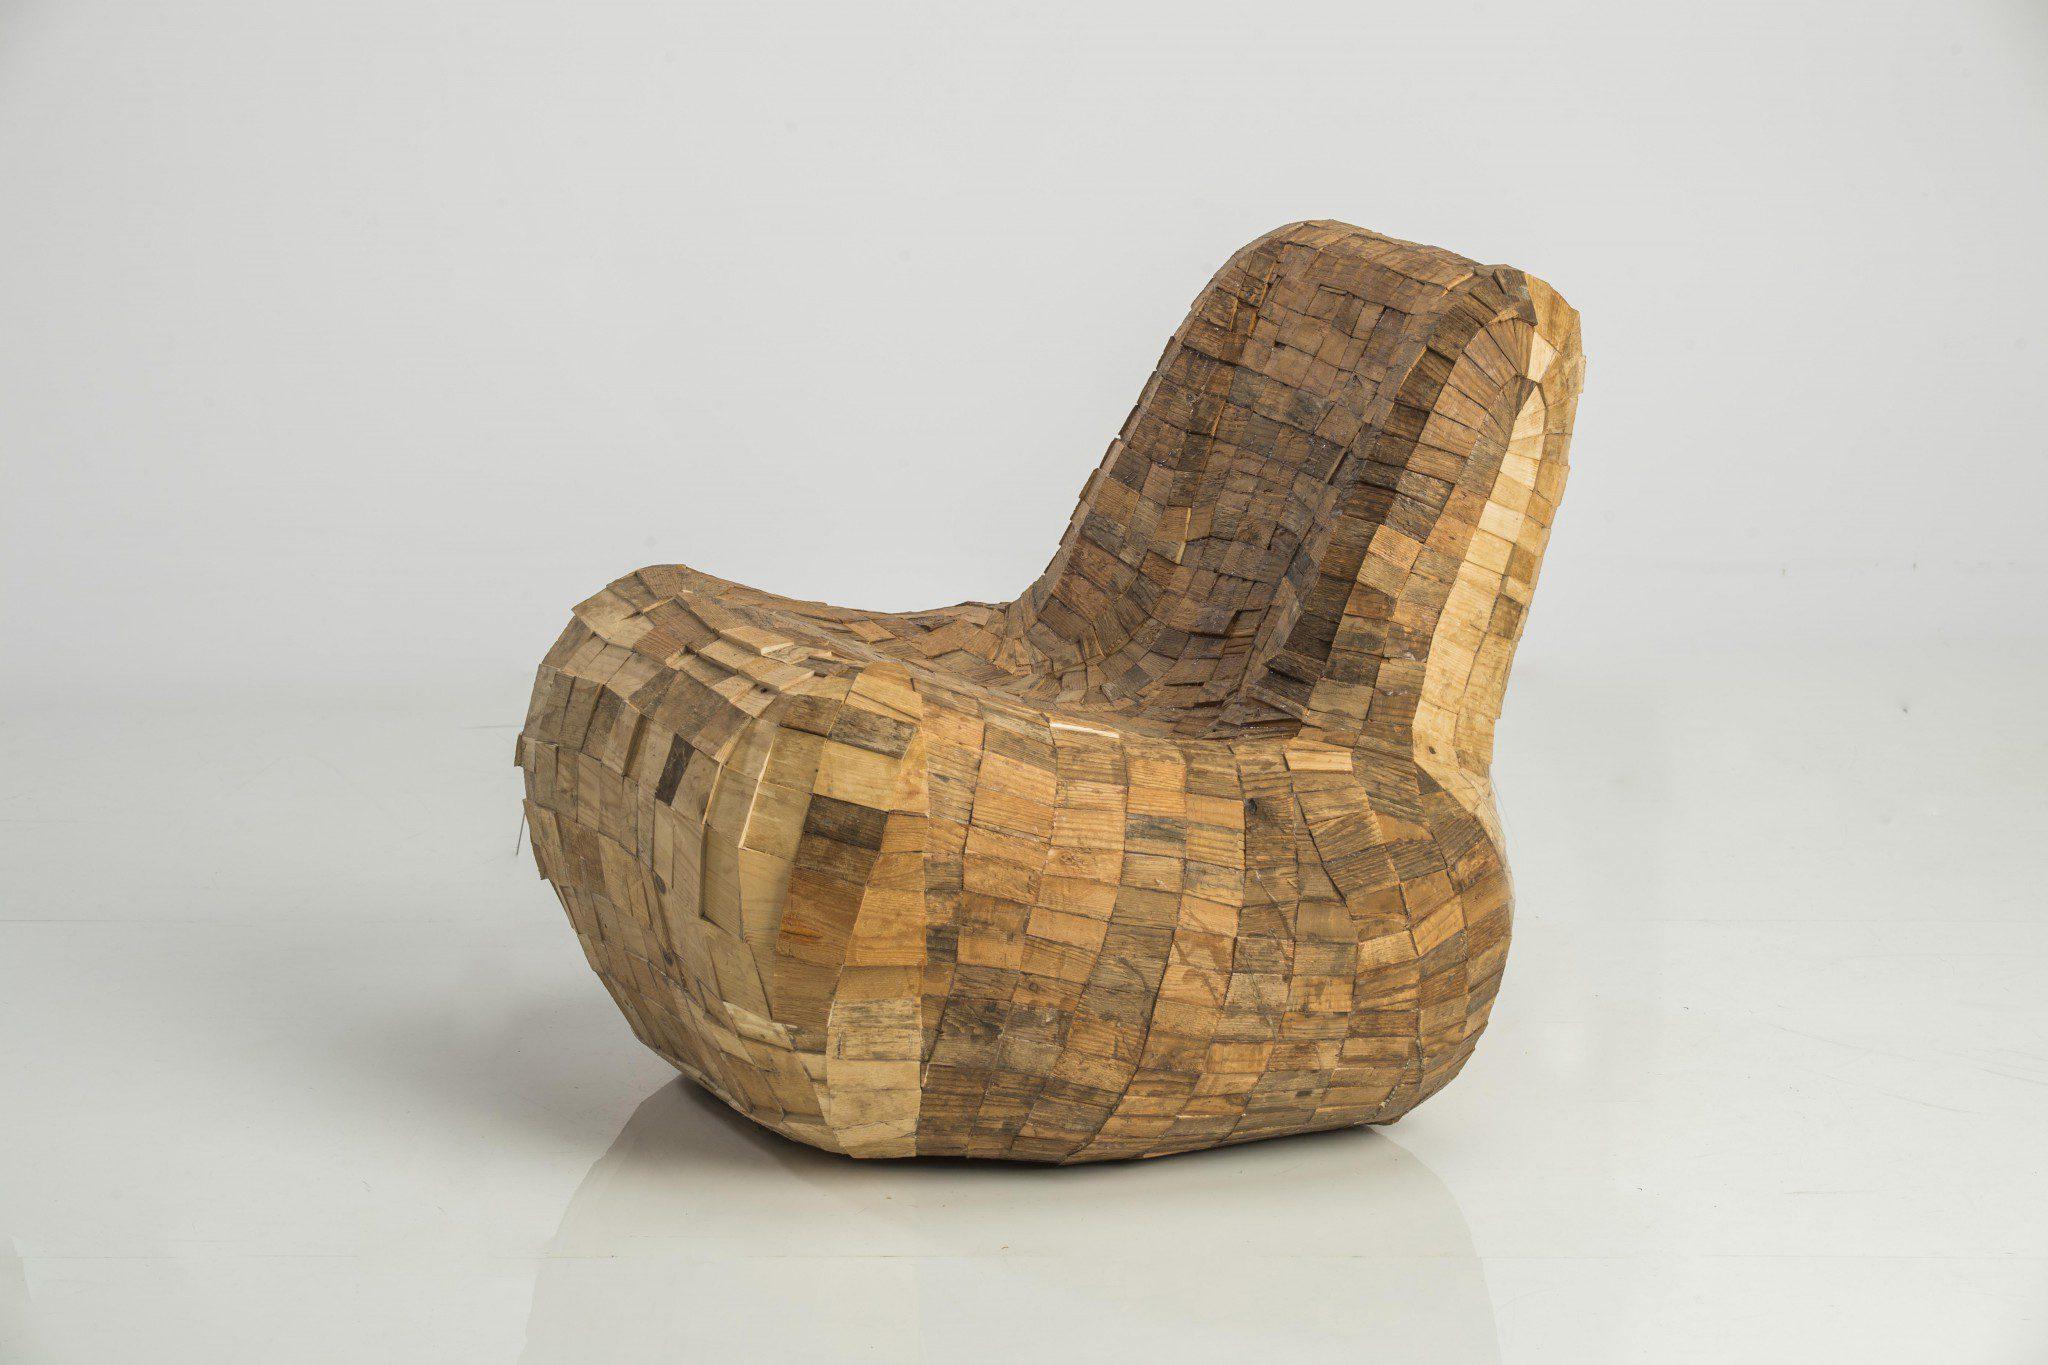 Woodwork This Is Not a Chair by Max Jungblut Artwork for Interior Environment For Sale